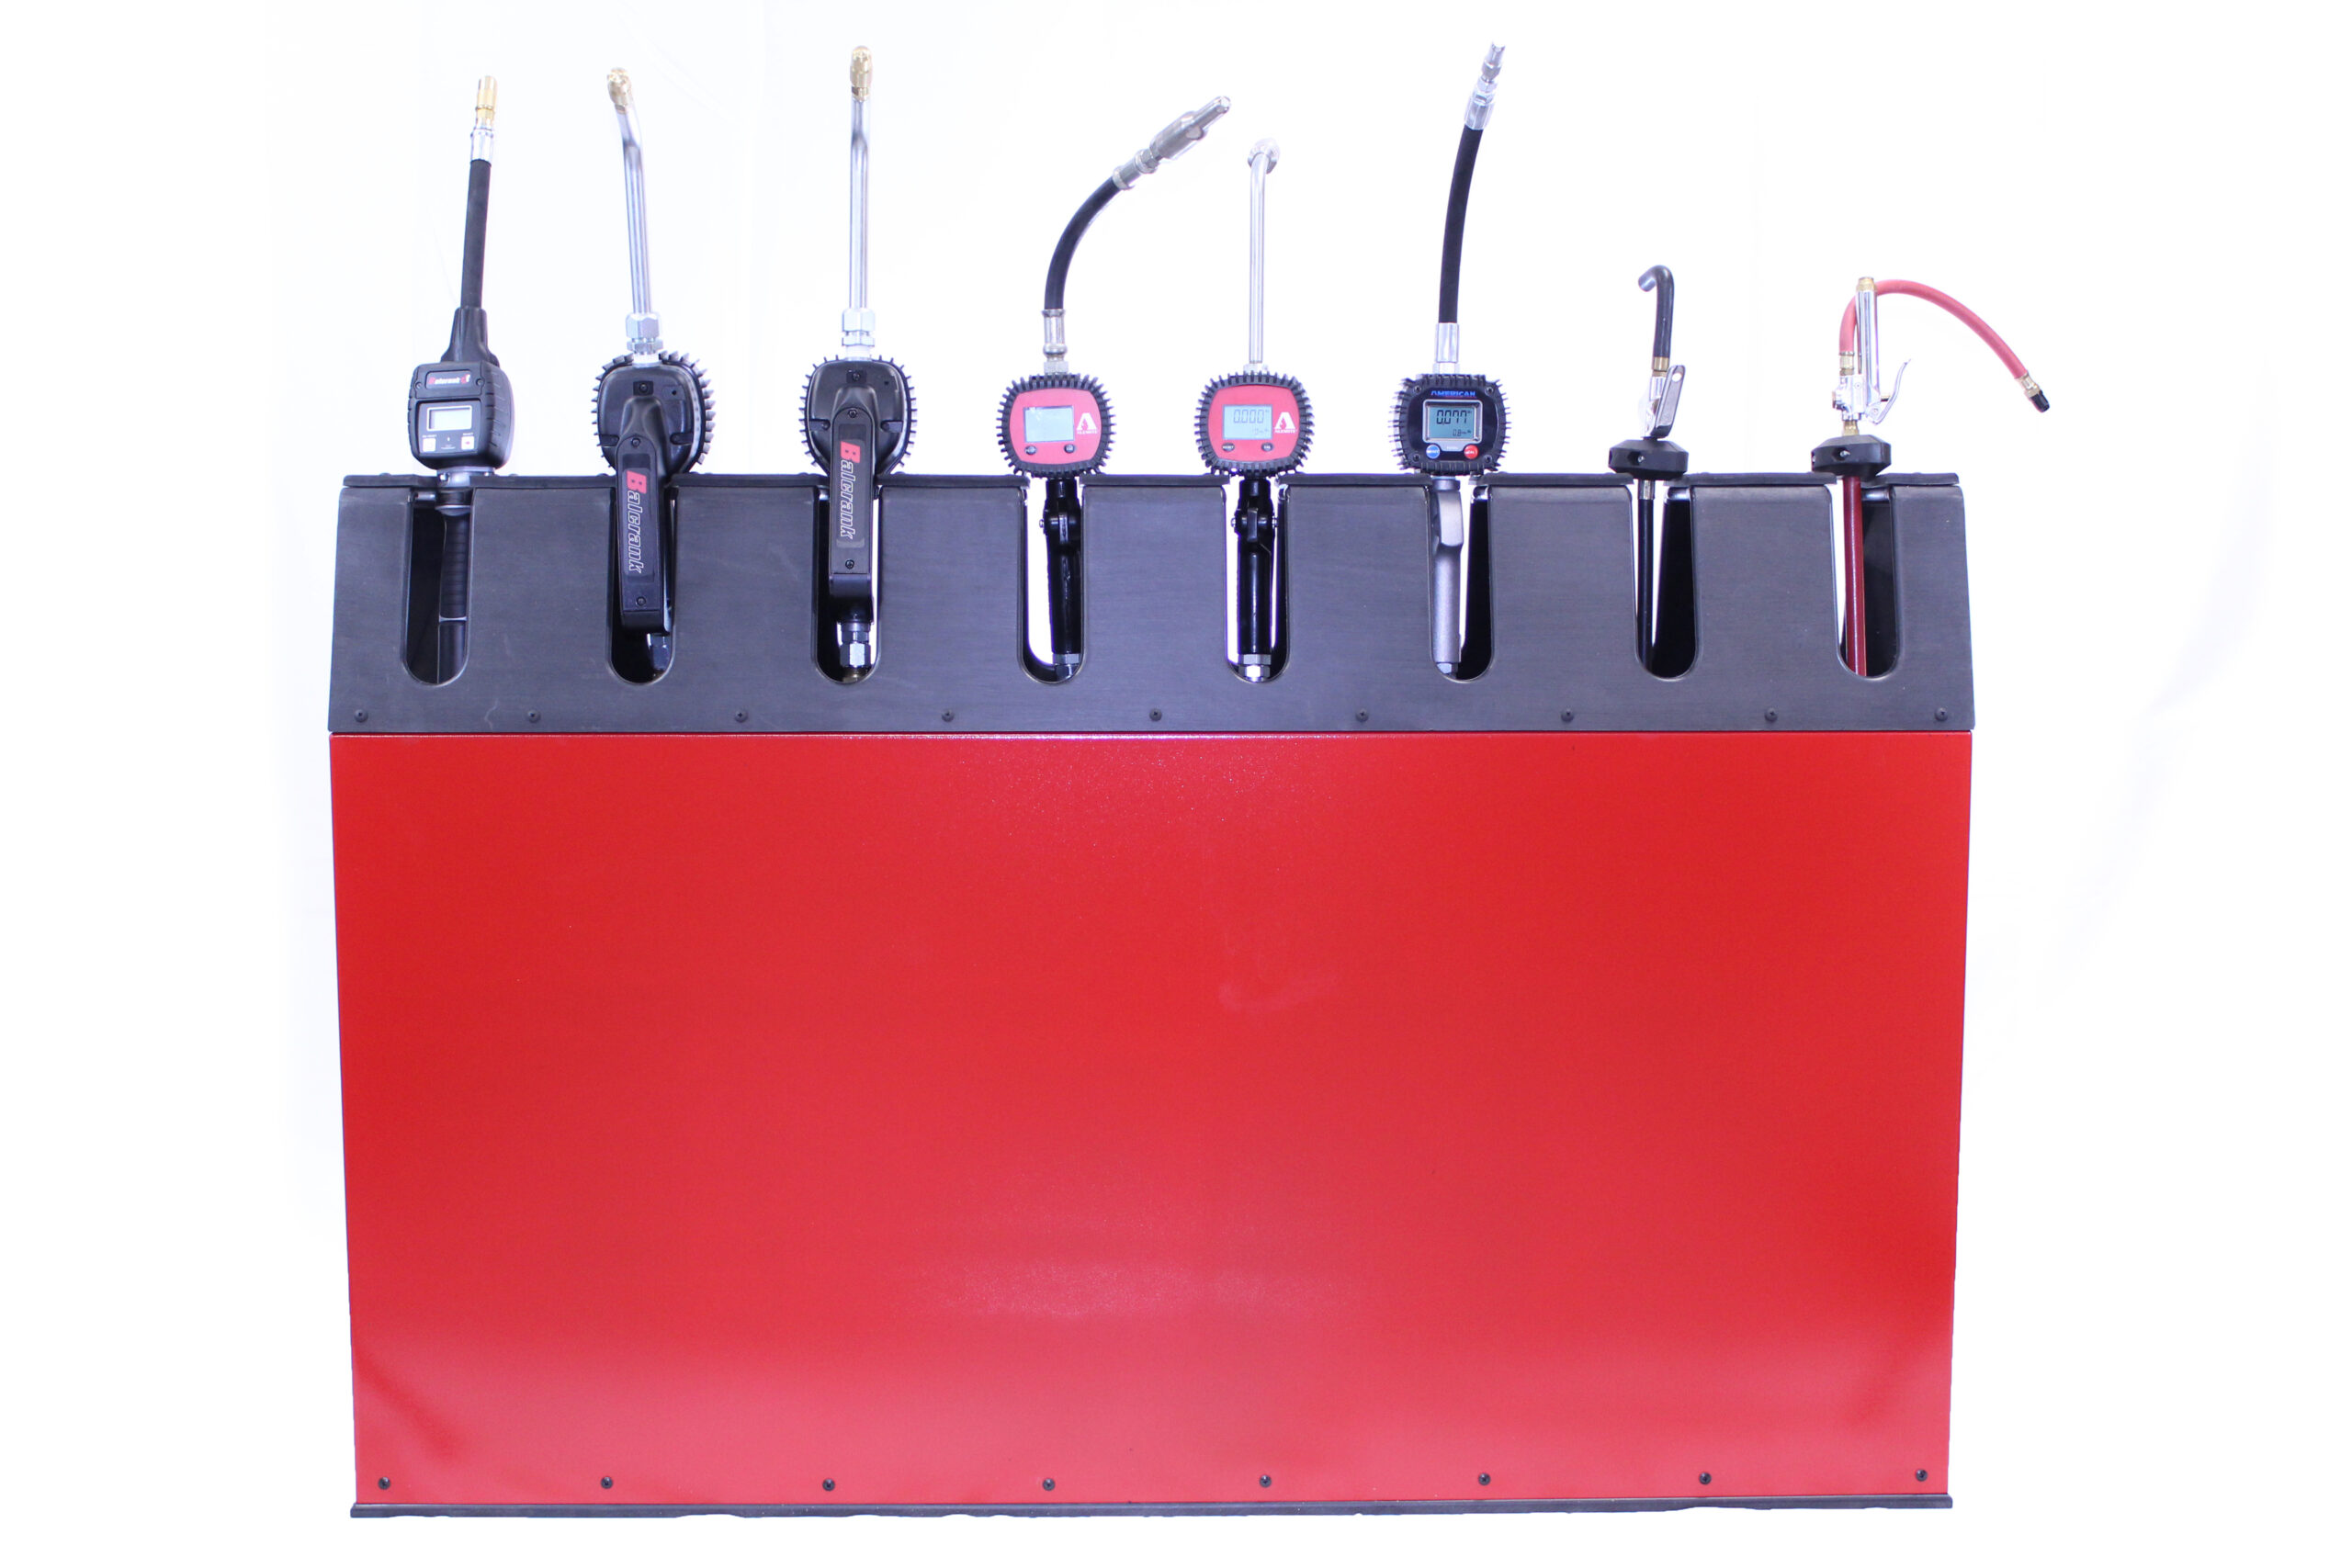 E142-4-RD — Lube Dispensing Bar (4-outlets) (Red finish)
(8 outlet pictured)